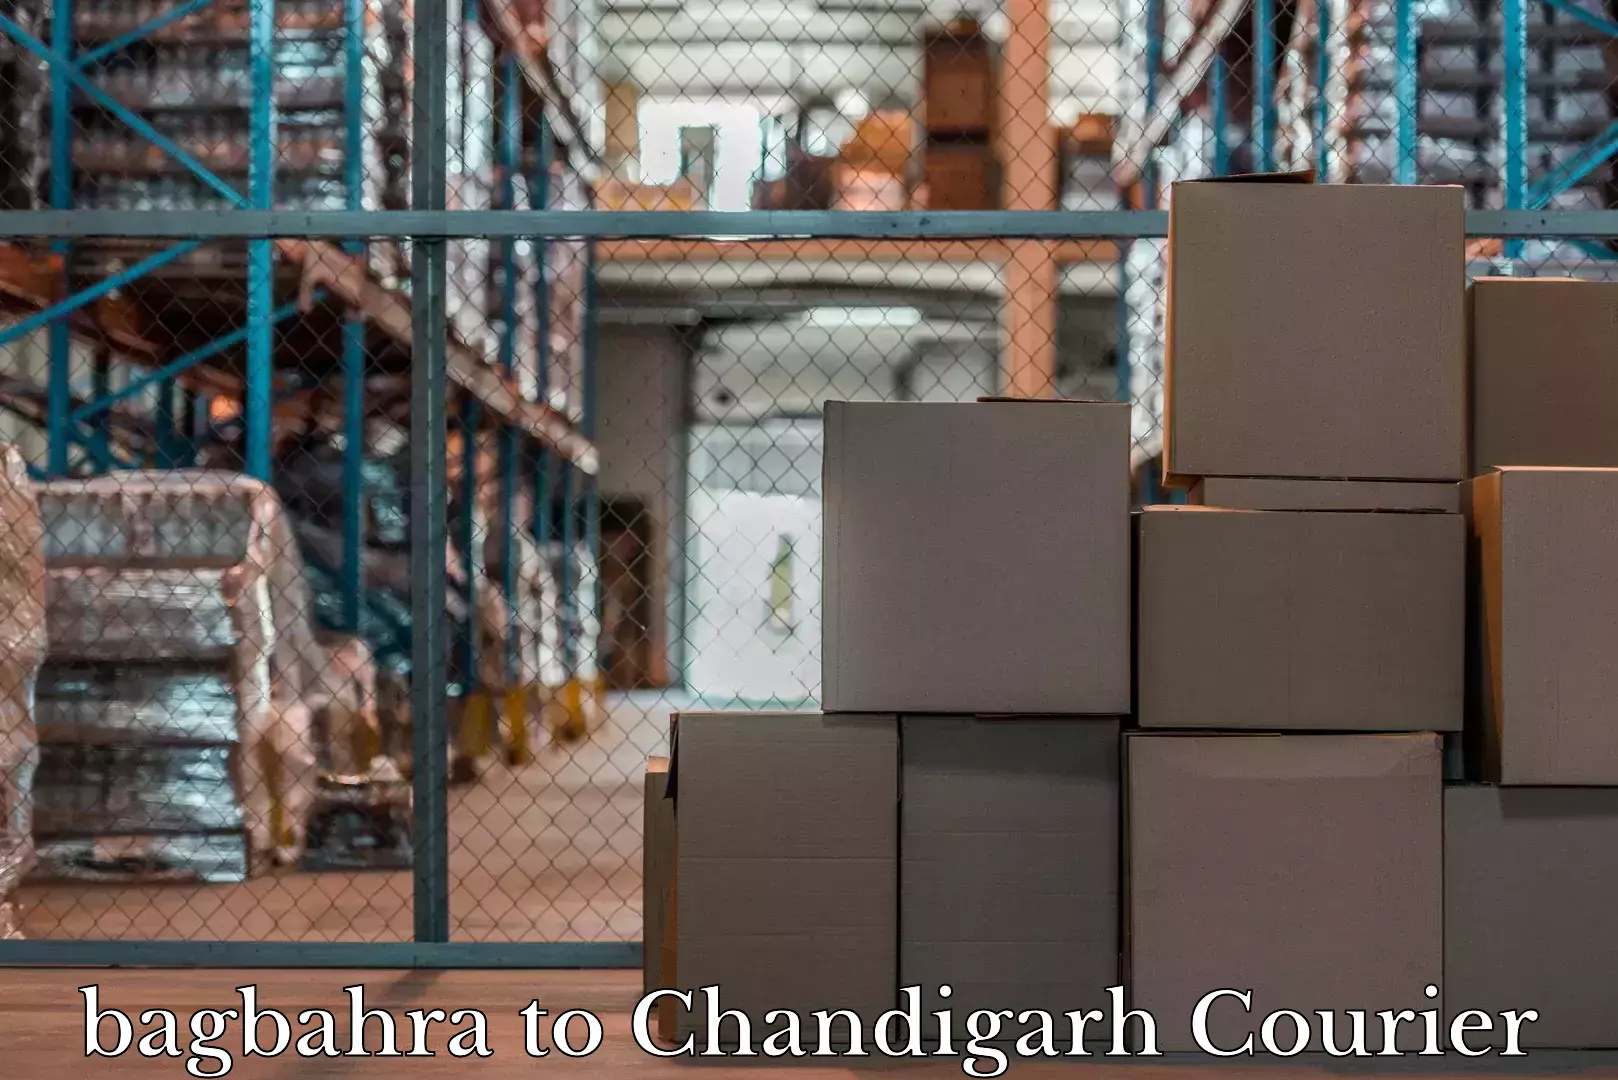 International baggage delivery in bagbahra to Chandigarh